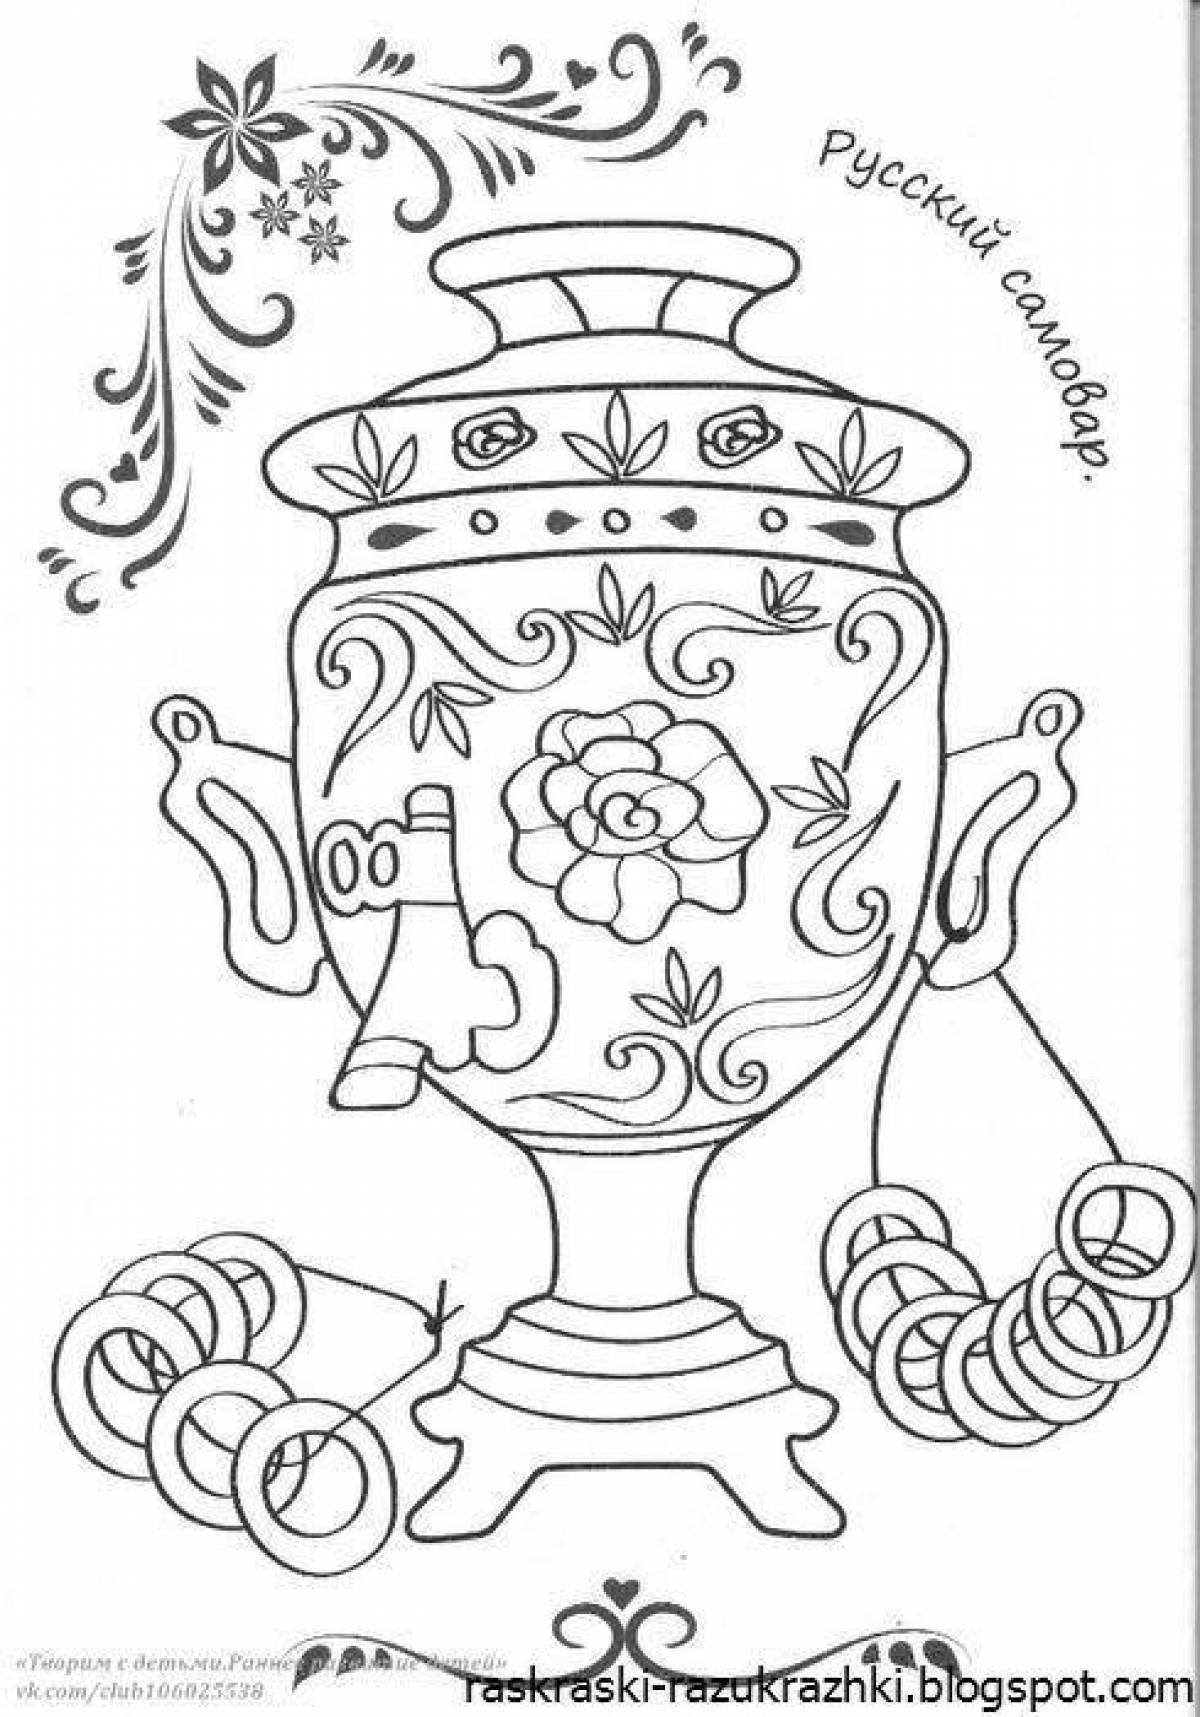 Coloring pages with Russian characters for kids